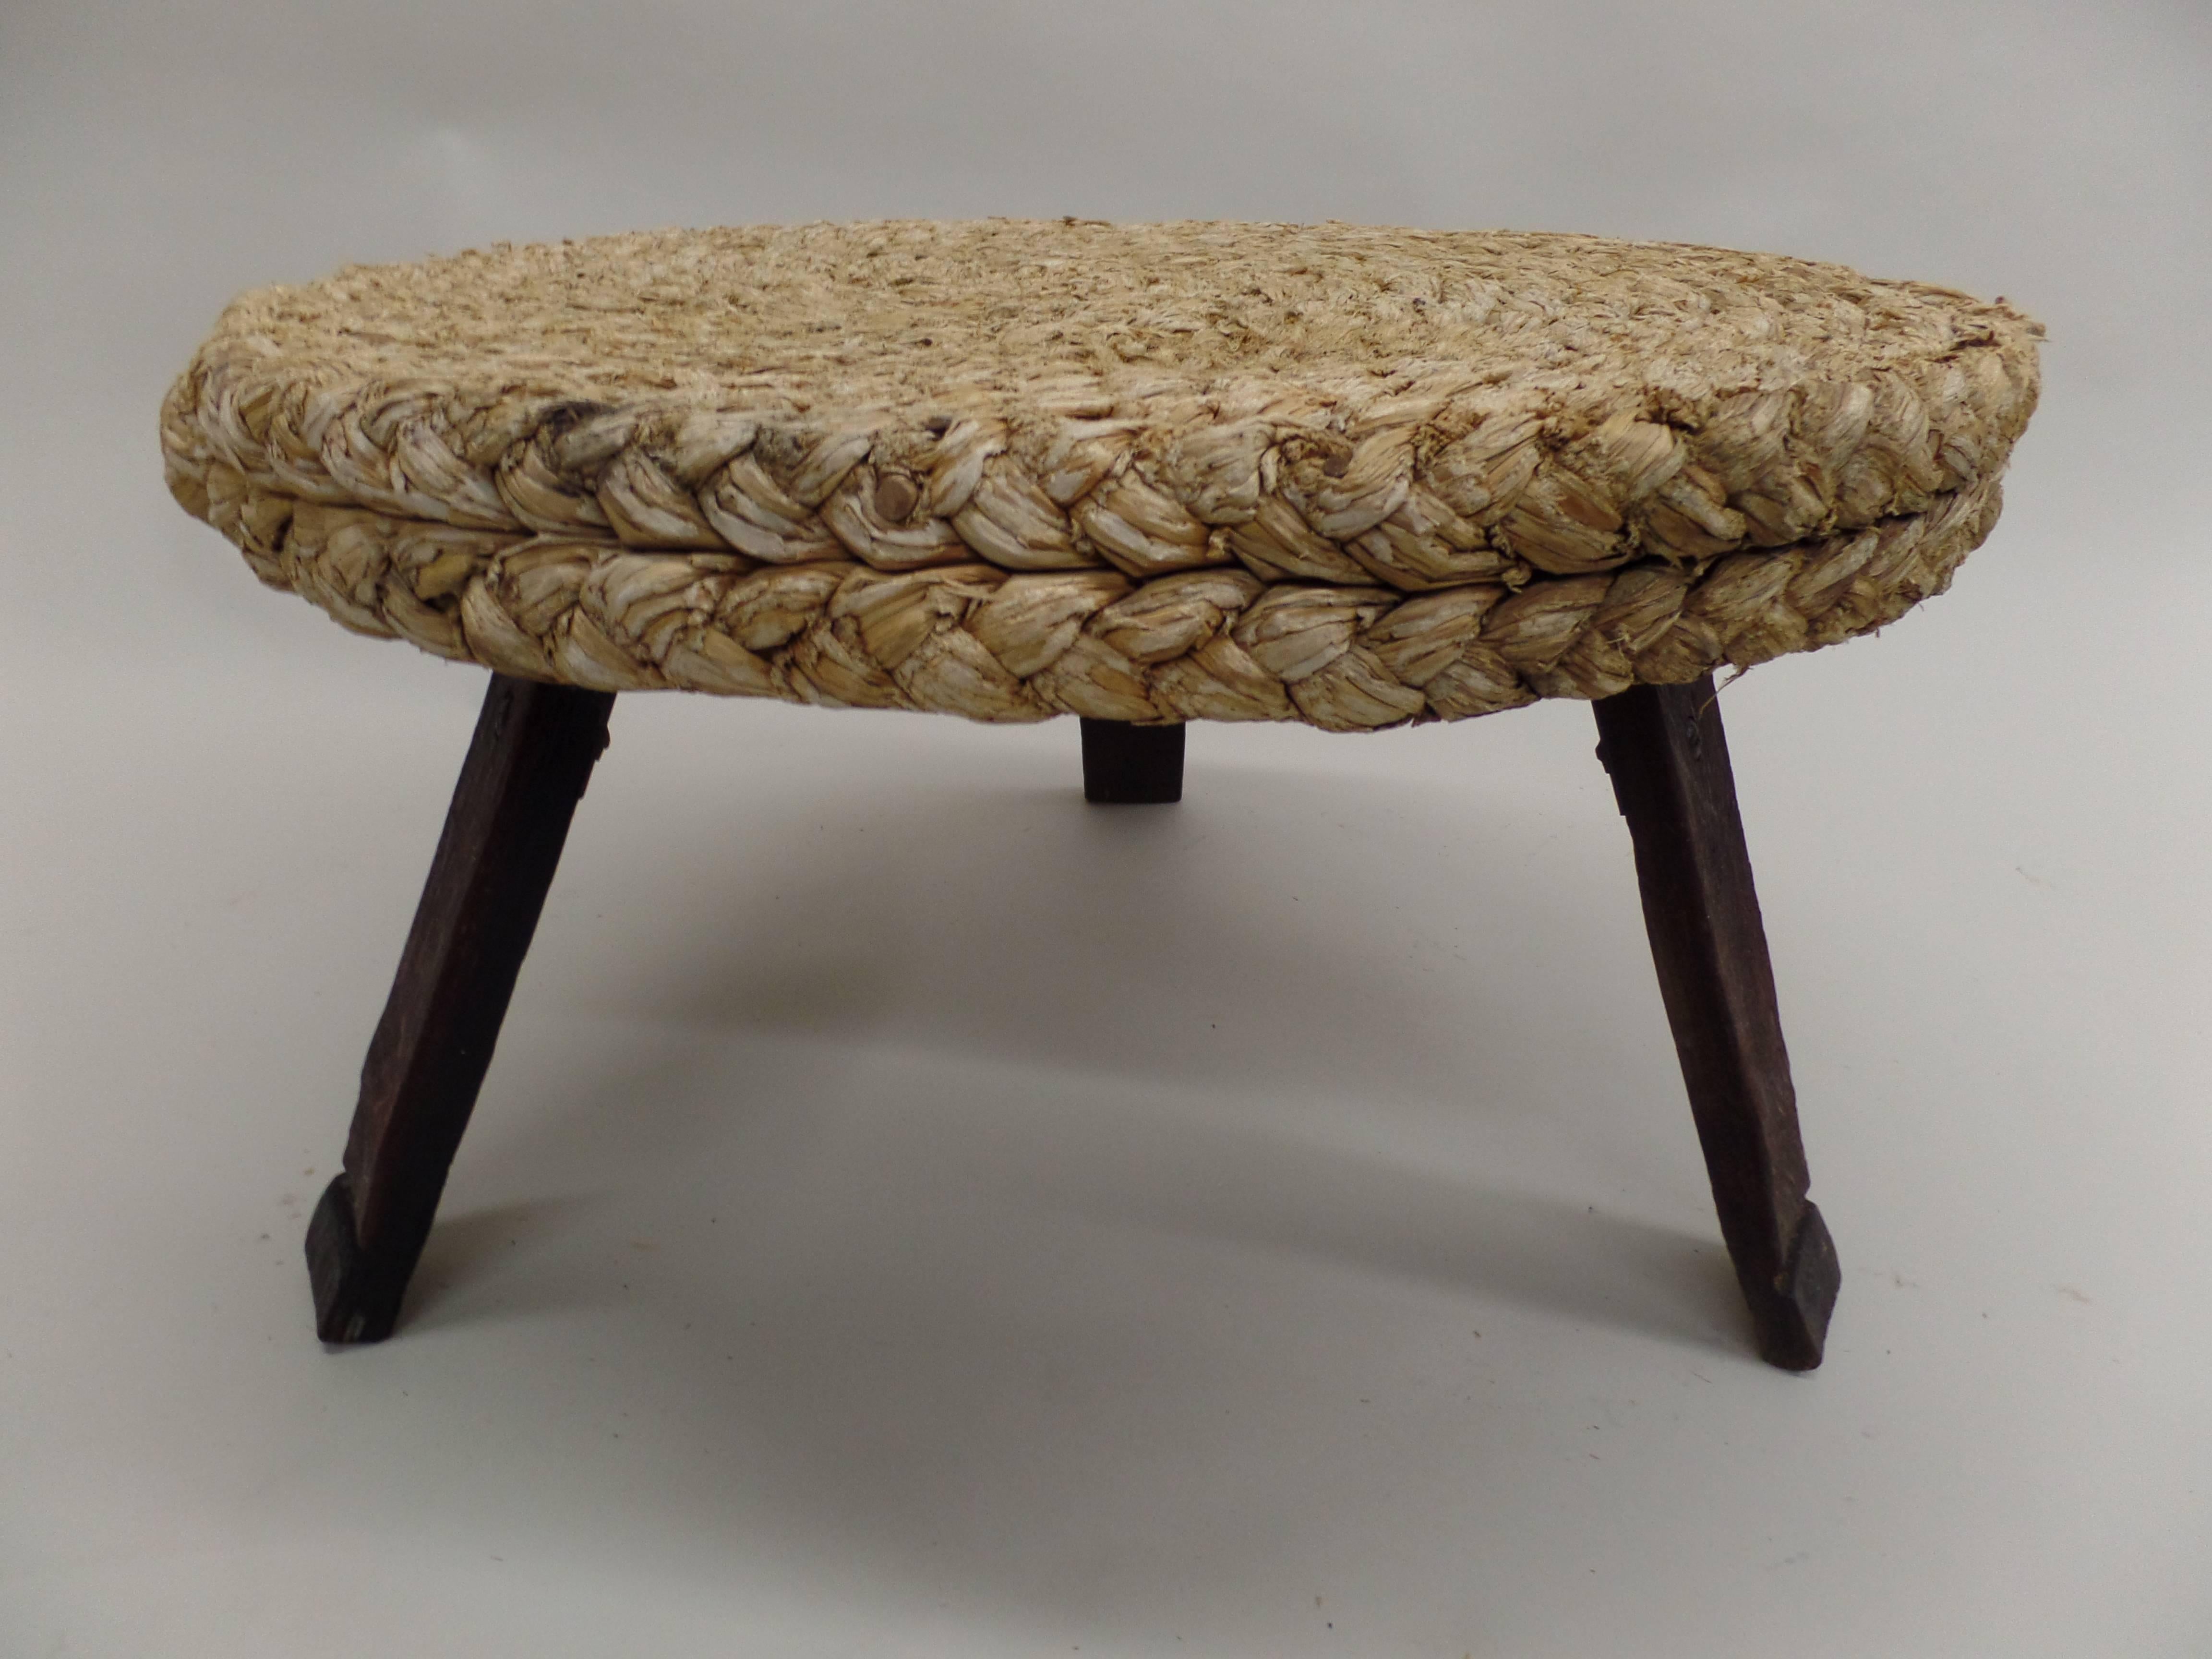 20th Century French Mid-Century Modern Woven Rush Round Coffee Table by Audoux & Minet, 1940